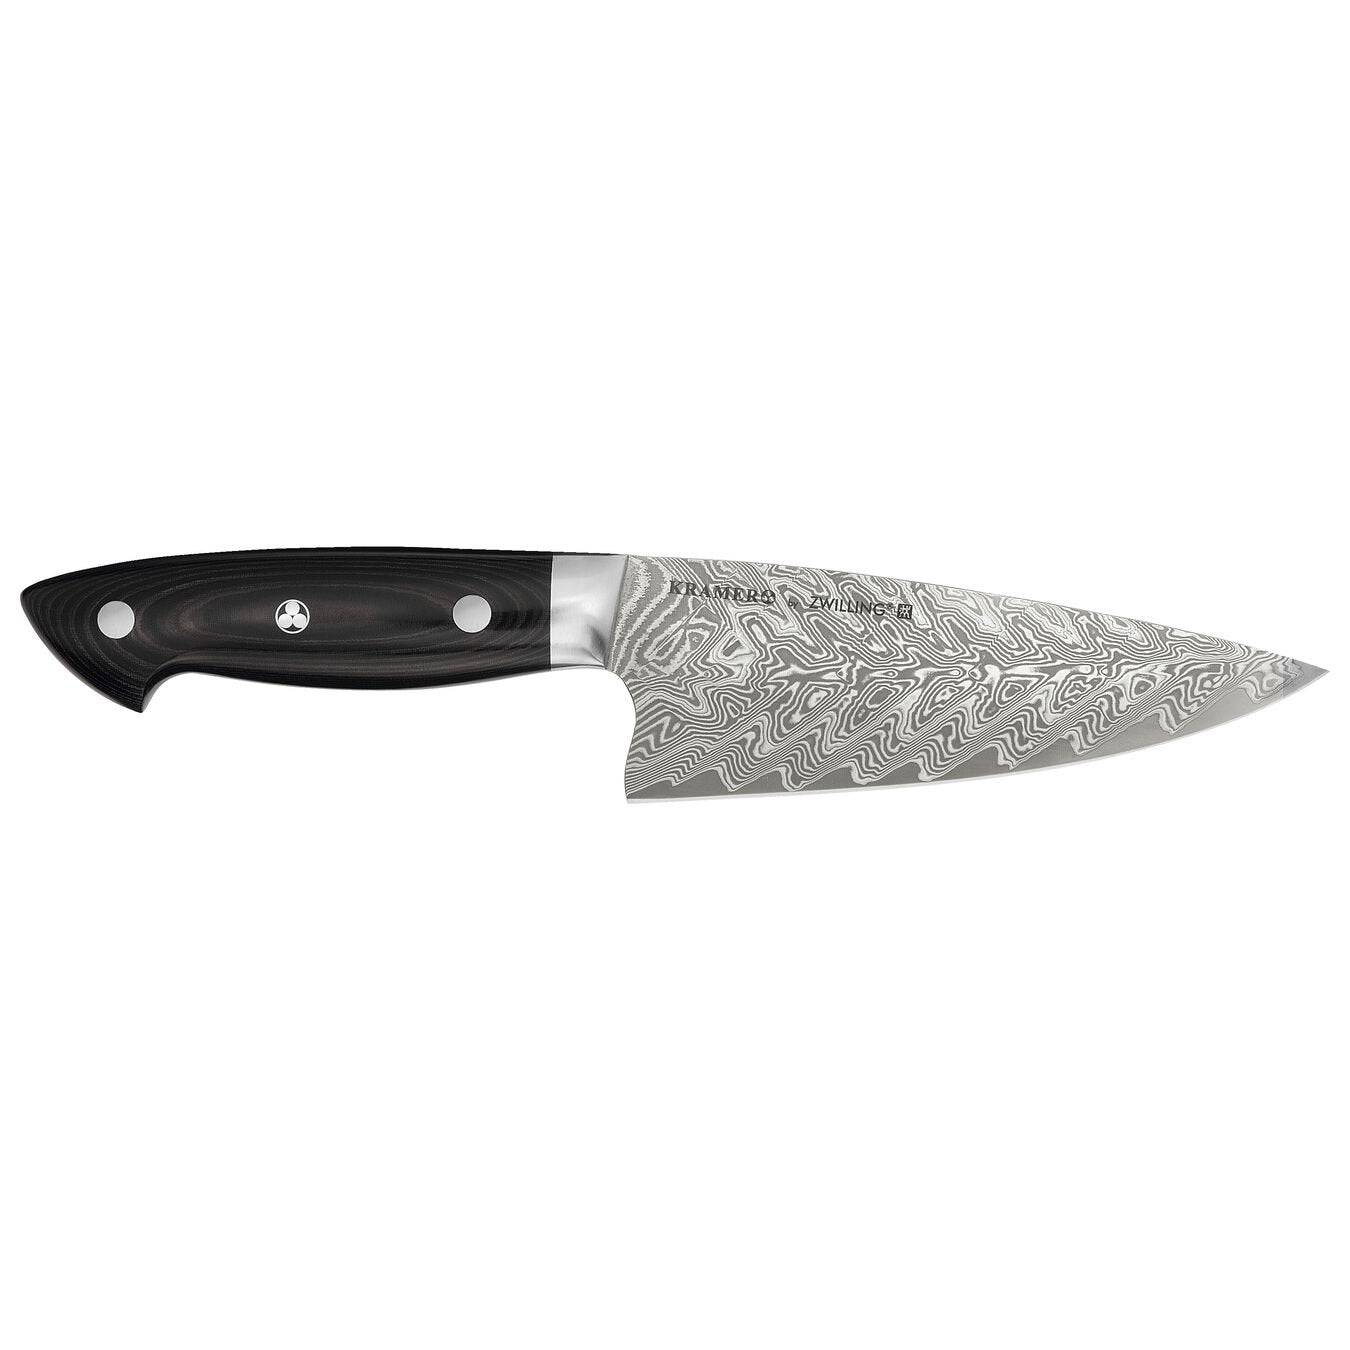 Zwilling Bob Kramer Euroline Damascus Collection SG2 Stainless Steel Chef's Knife, 6-Inches - Kitchen Universe